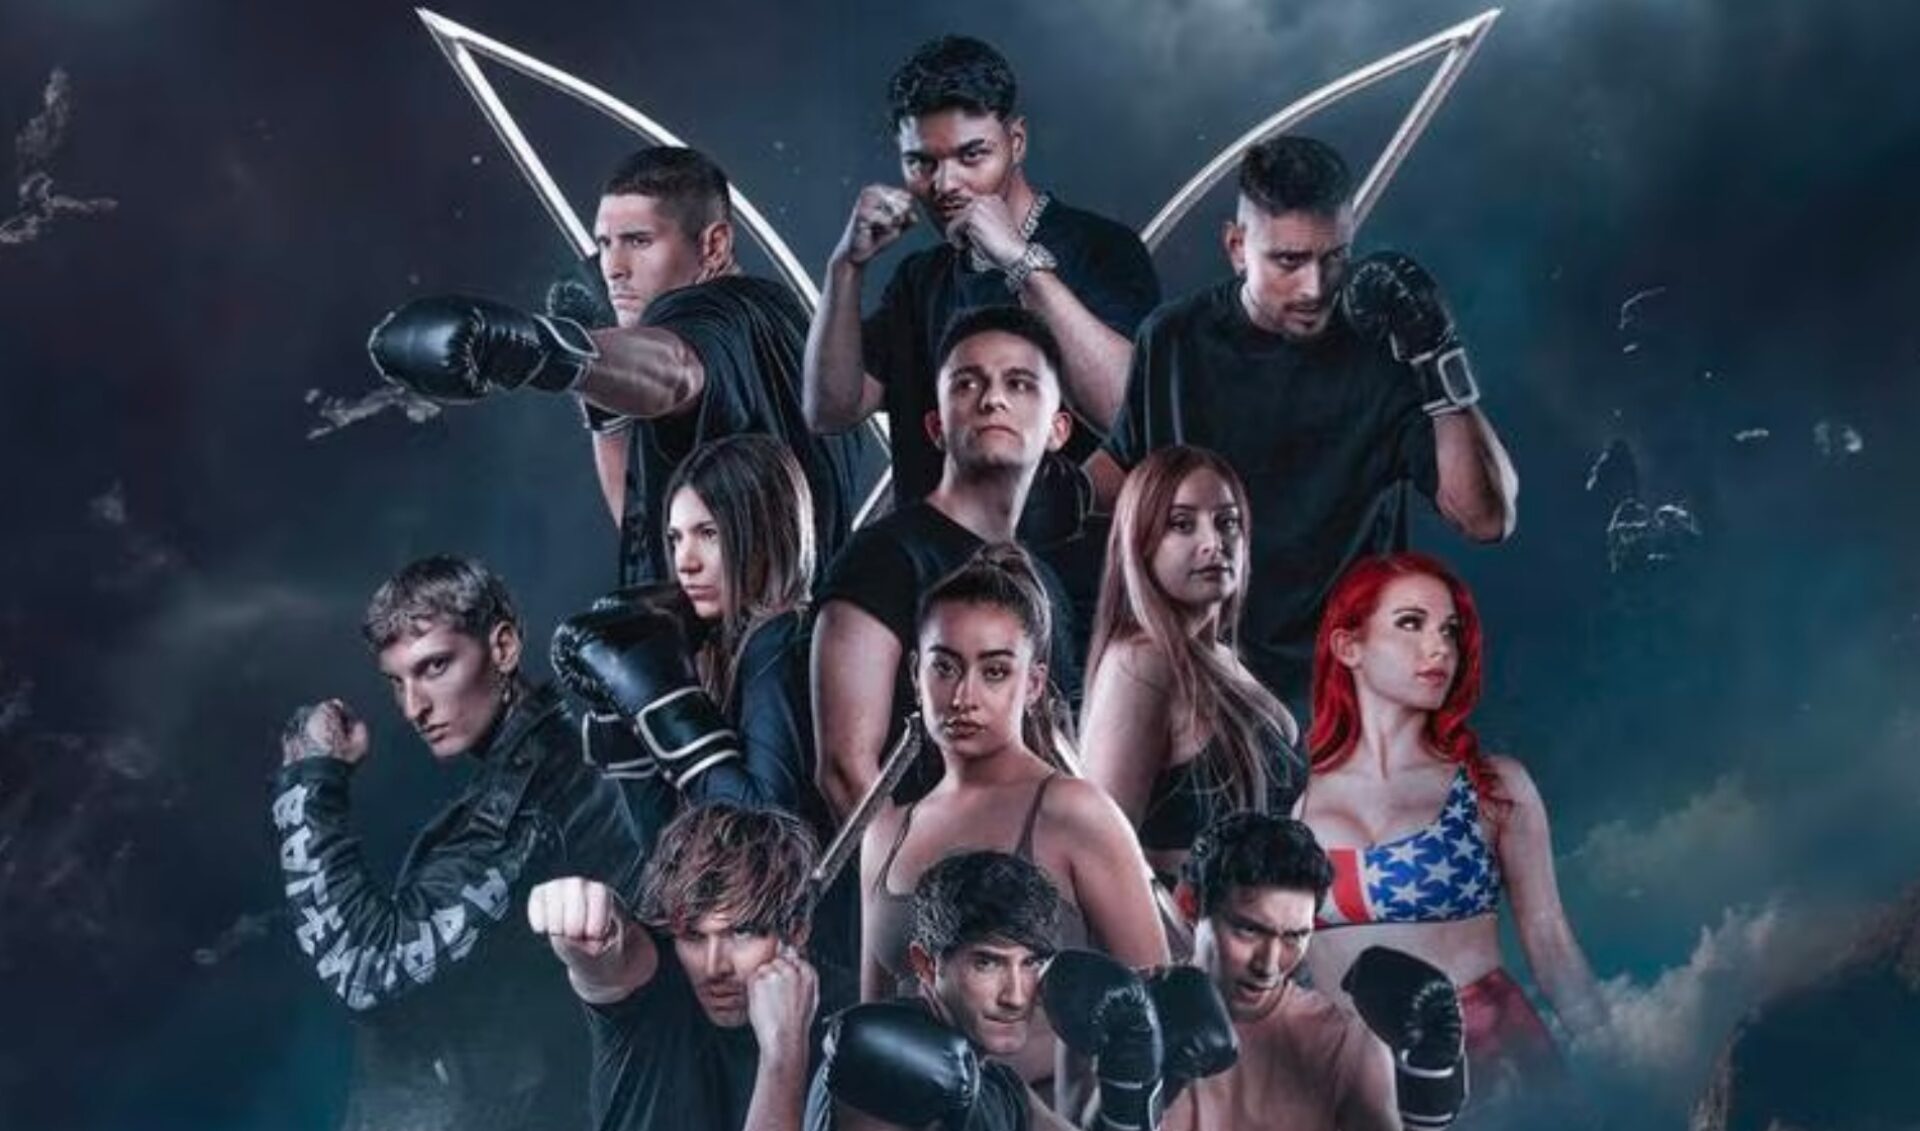 ‘La Velada Del Año III’ brings influencer boxing to new heights with record-setting Twitch stream